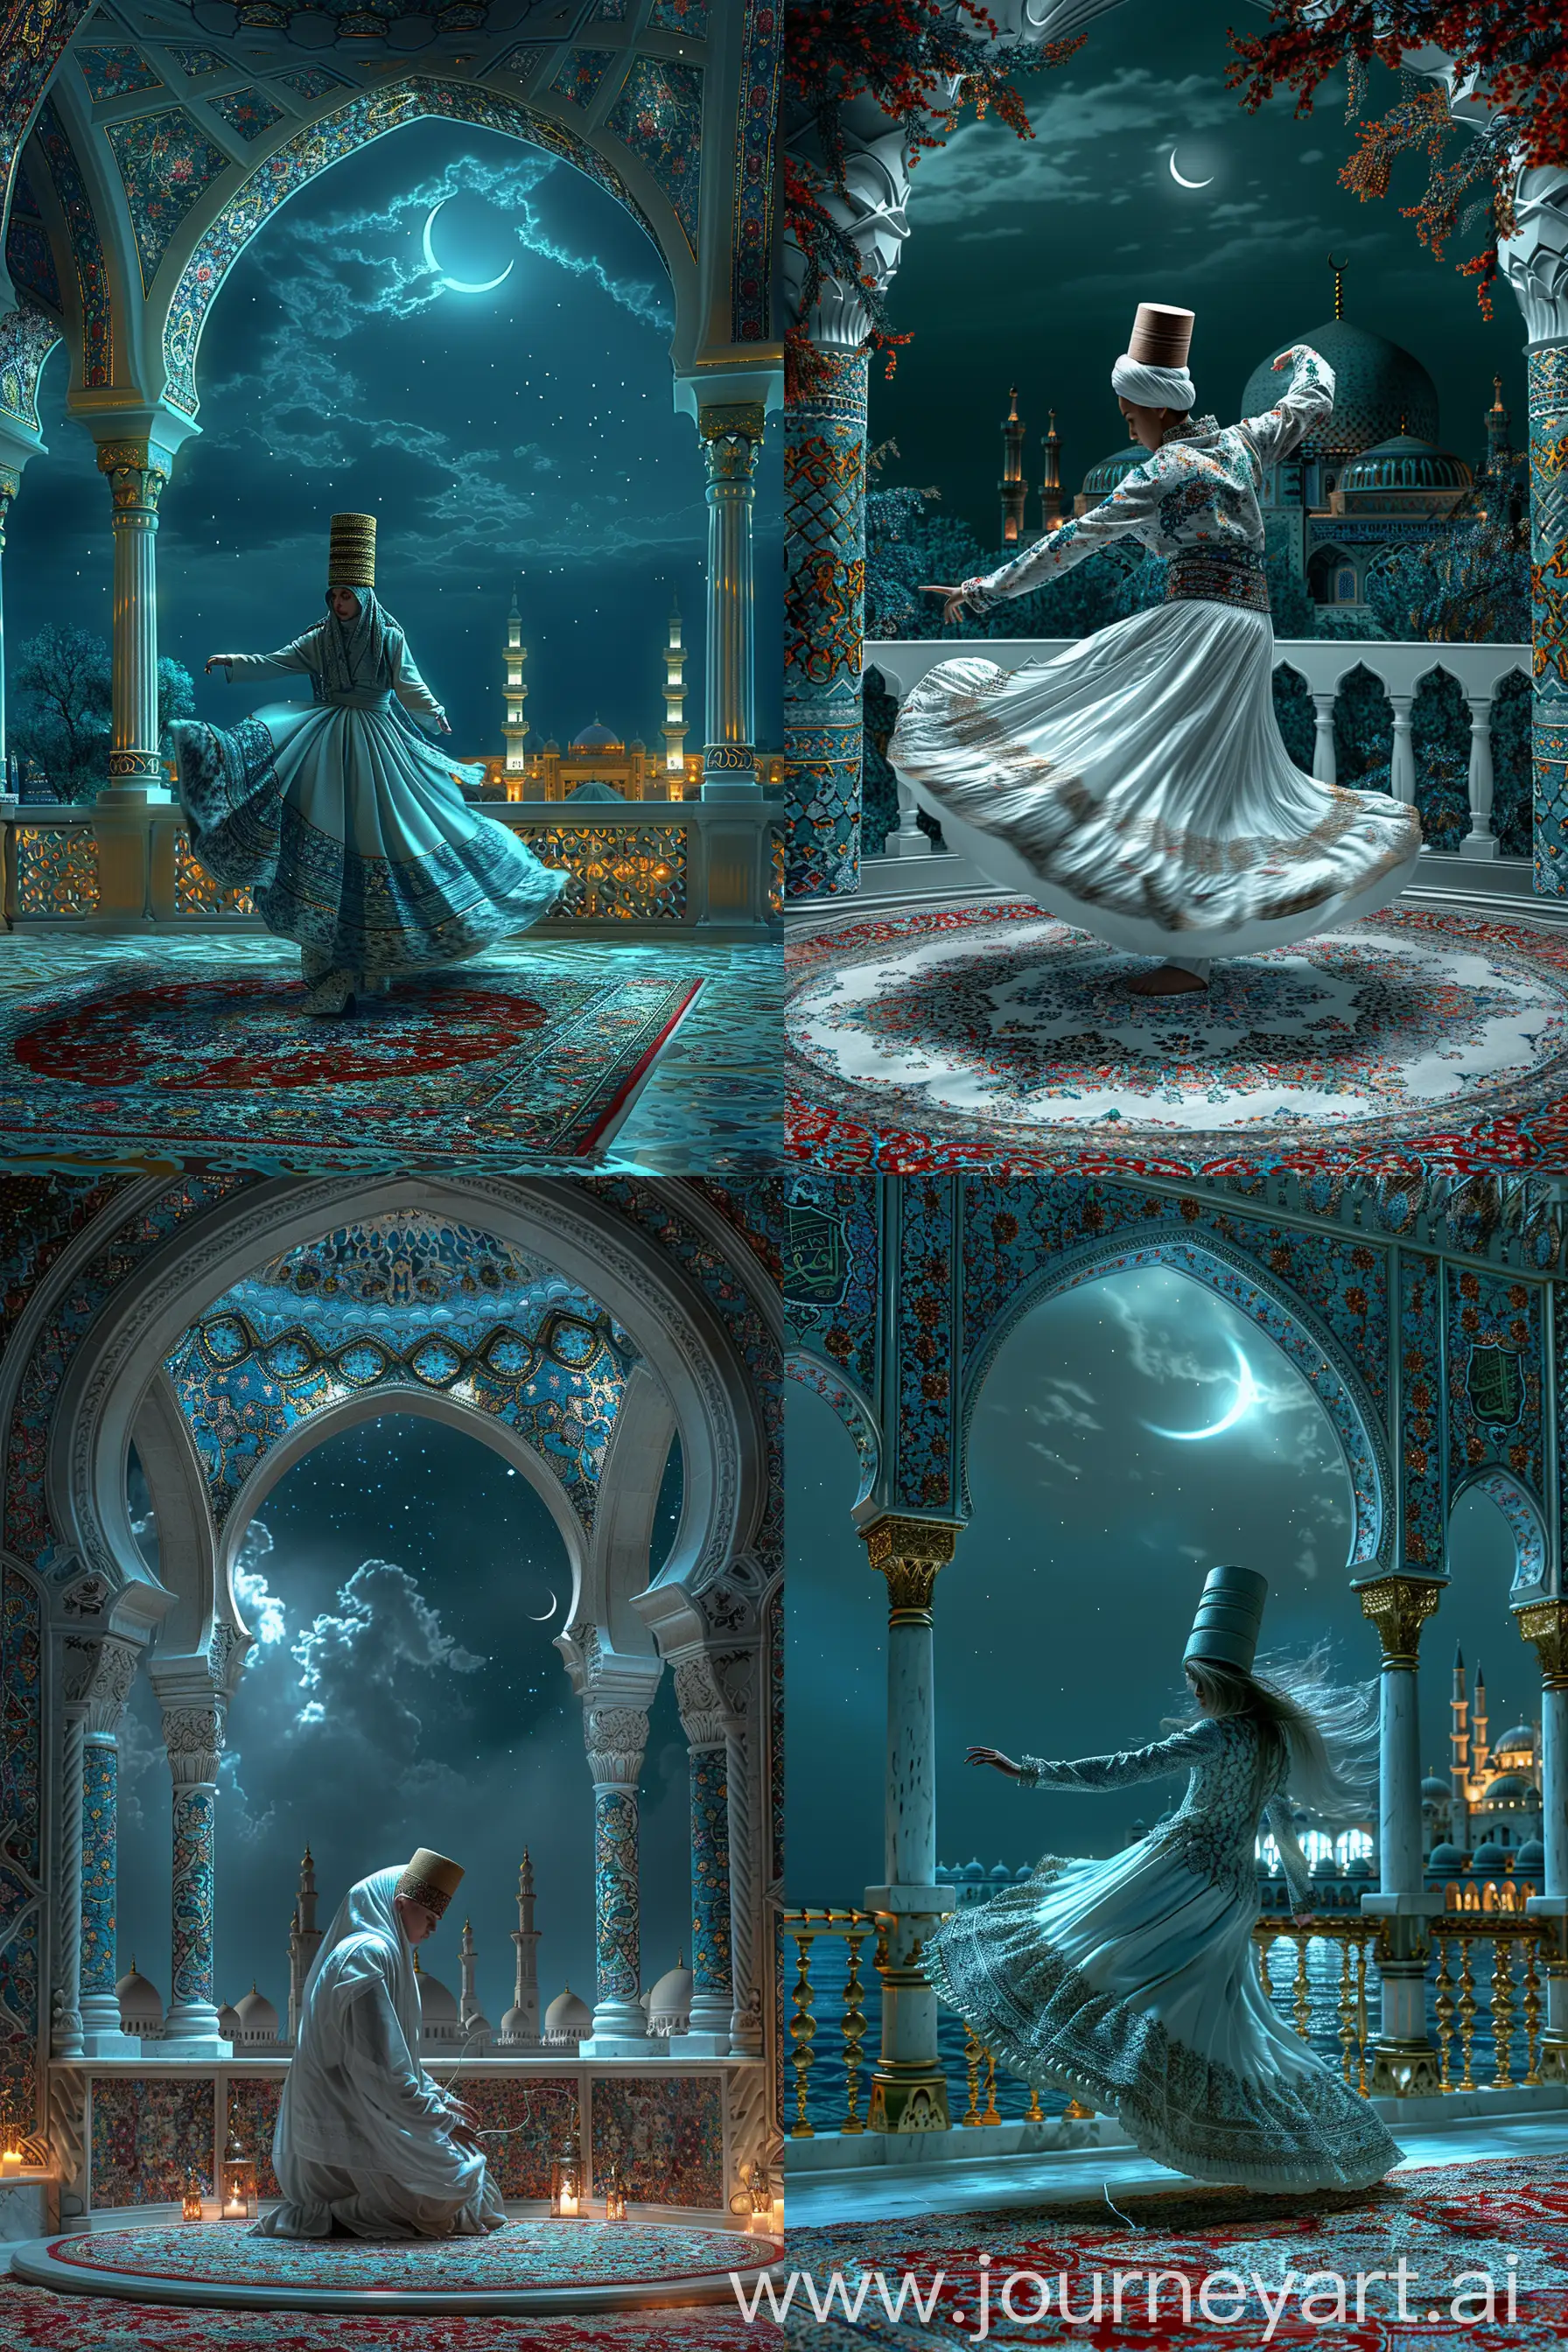 A young British dervish wearing cylindrical fez cap performing sufi whirling sema dance on a persian carpet, inside an octagonal balcony having three arches decorated with persian floral motifs, serene night sky with a crescent, view of Persian tiled mosque, White blue red golden  --v 6 --ar 2:3 --sref  https://cdn.discordapp.com/attachments/1213041174428782623/1246562622023667812/IMG_20240326_220808.png?ex=66602329&is=665ed1a9&hm=9170109863dc2f0af54ab3142373f4e8a90d2bf88e839b7b0cc3564cf0fa90d2& --style raw --q 1 --s 999